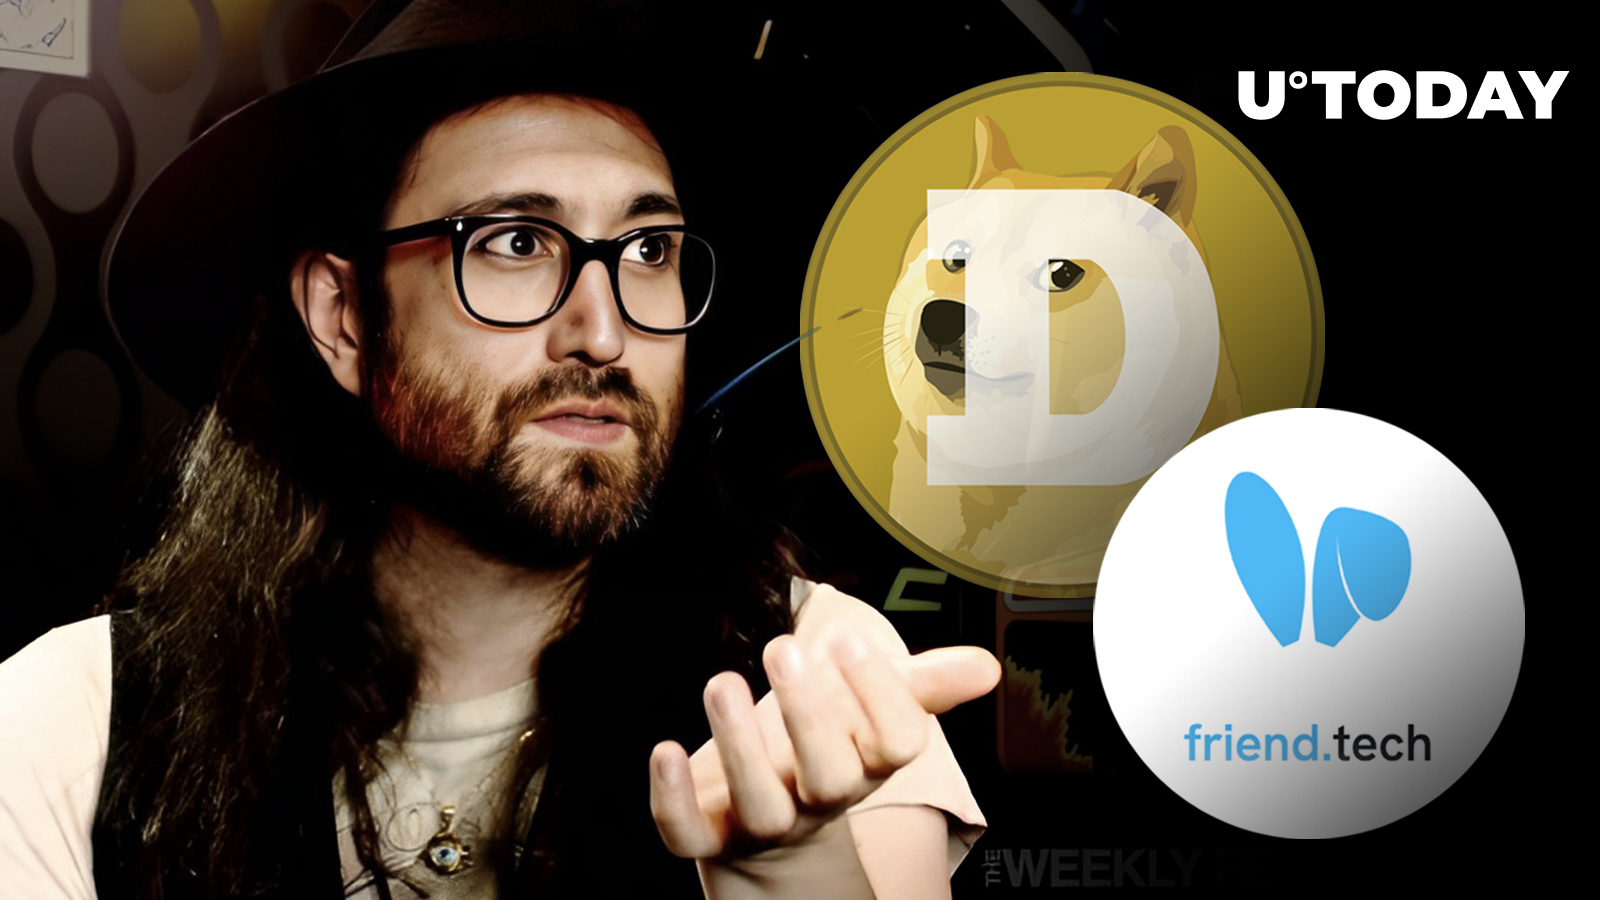 John Lennon’s Son and Dogecoin (DOGE) Creator React to Friend Tech Key Prices